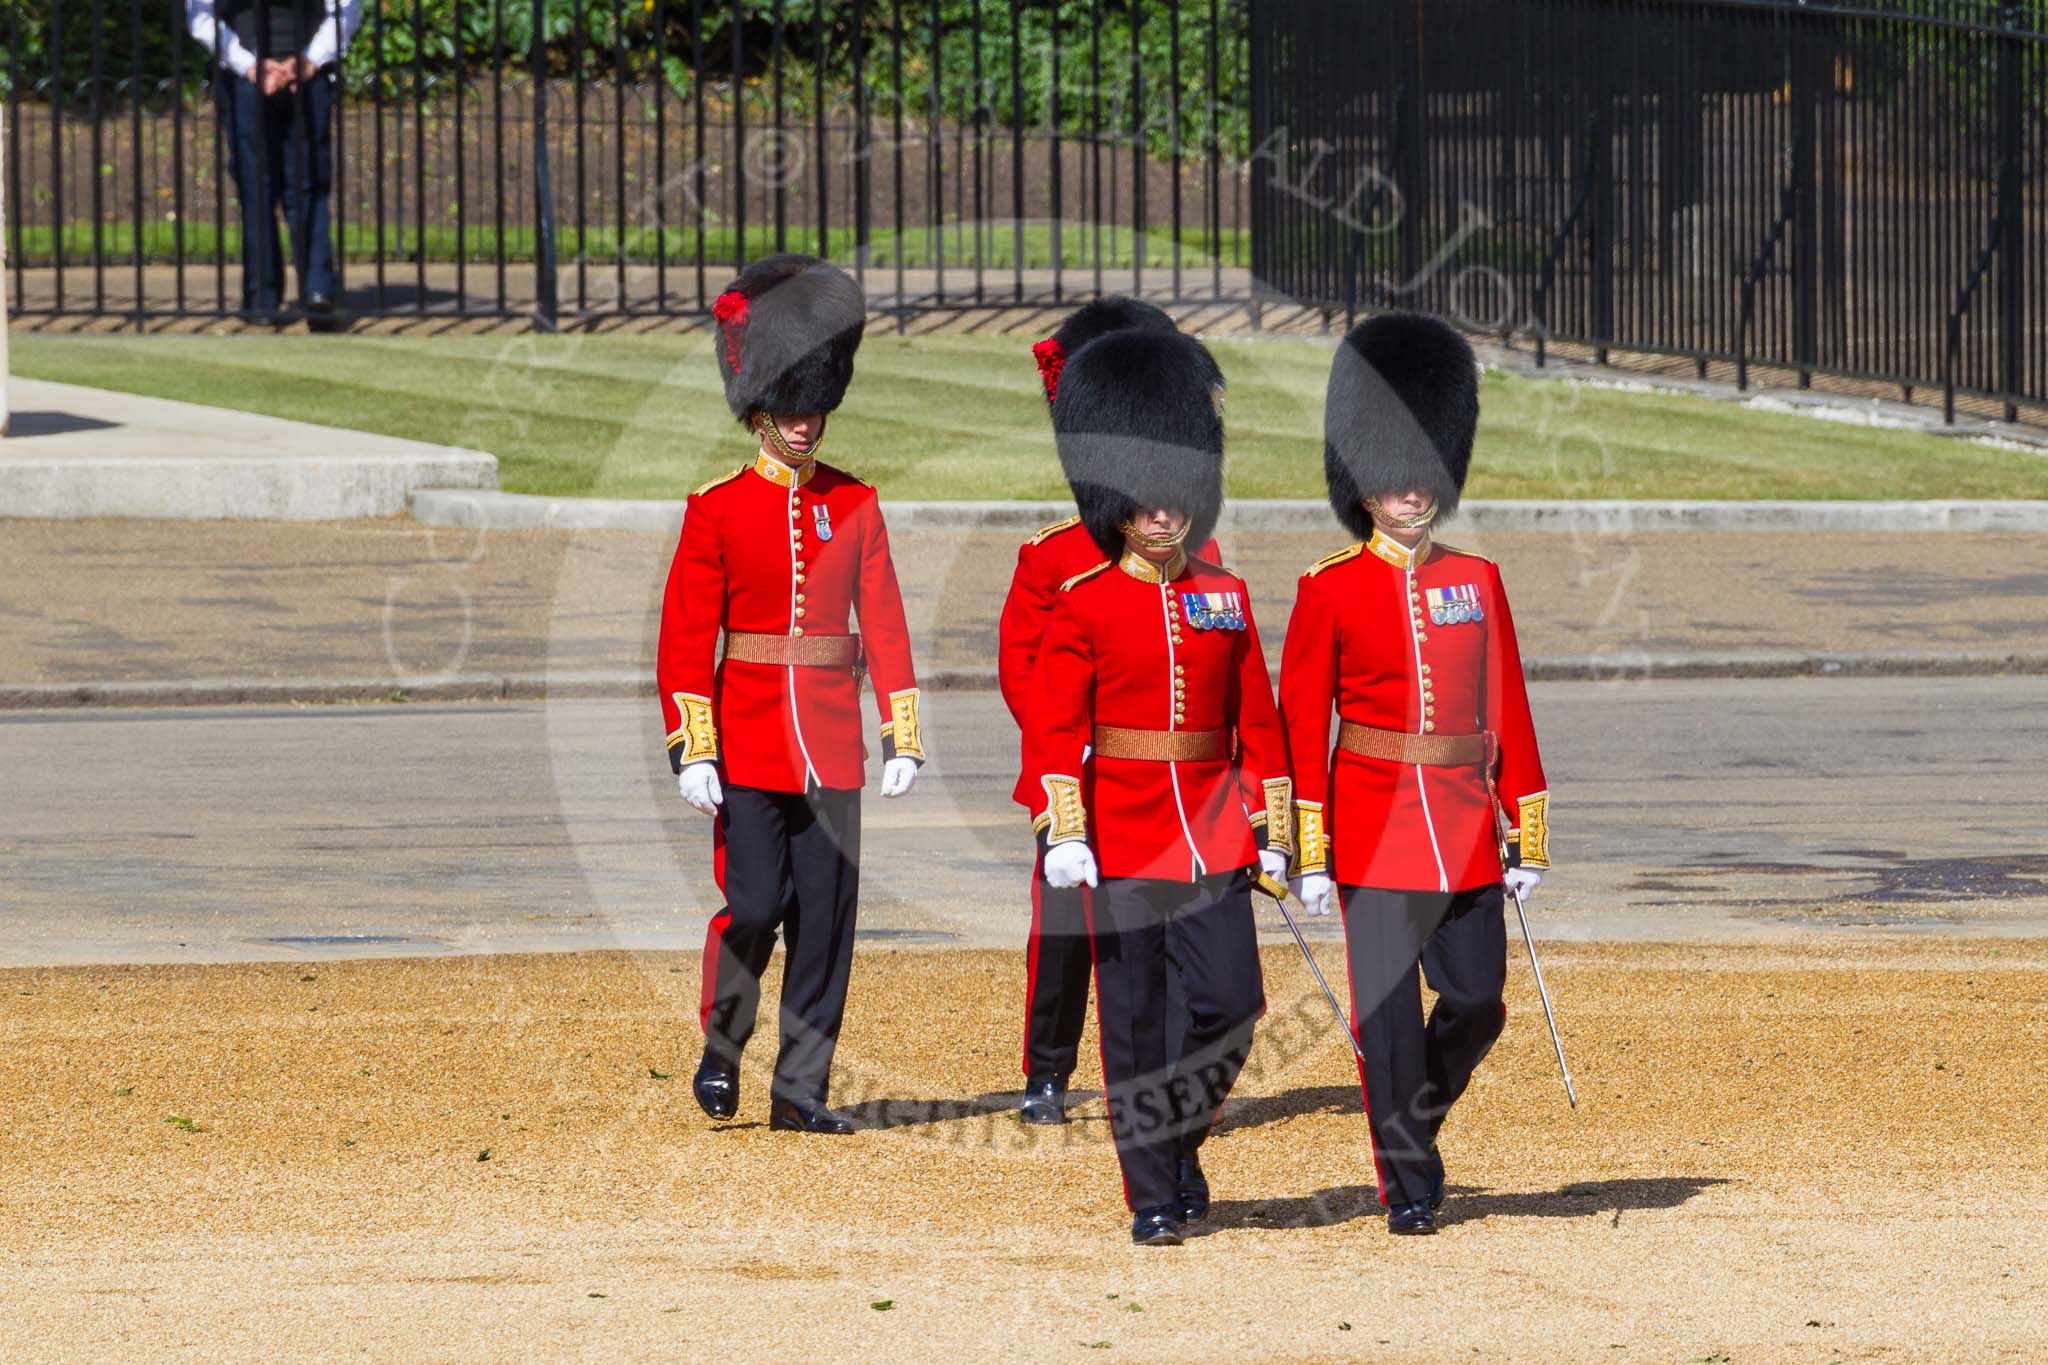 The Colonel's Review 2015.
Horse Guards Parade, Westminster,
London,

United Kingdom,
on 06 June 2015 at 09:44, image #21